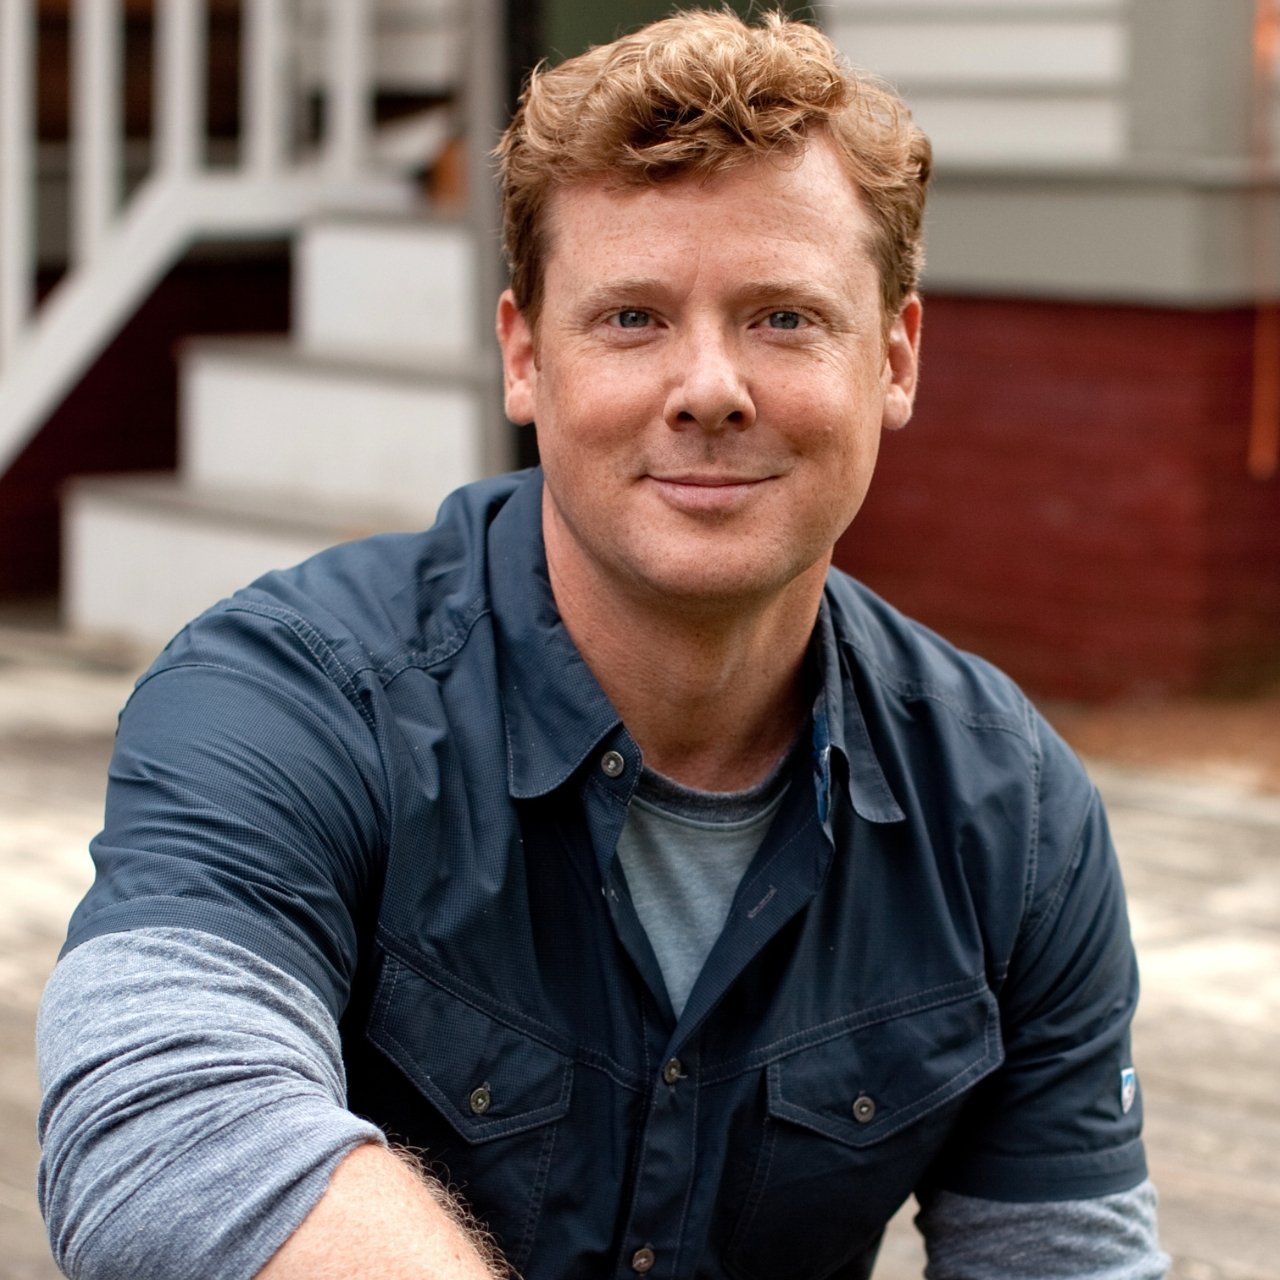 Emmyaward Winning Kevin O’Connor of This Old House to Keynote